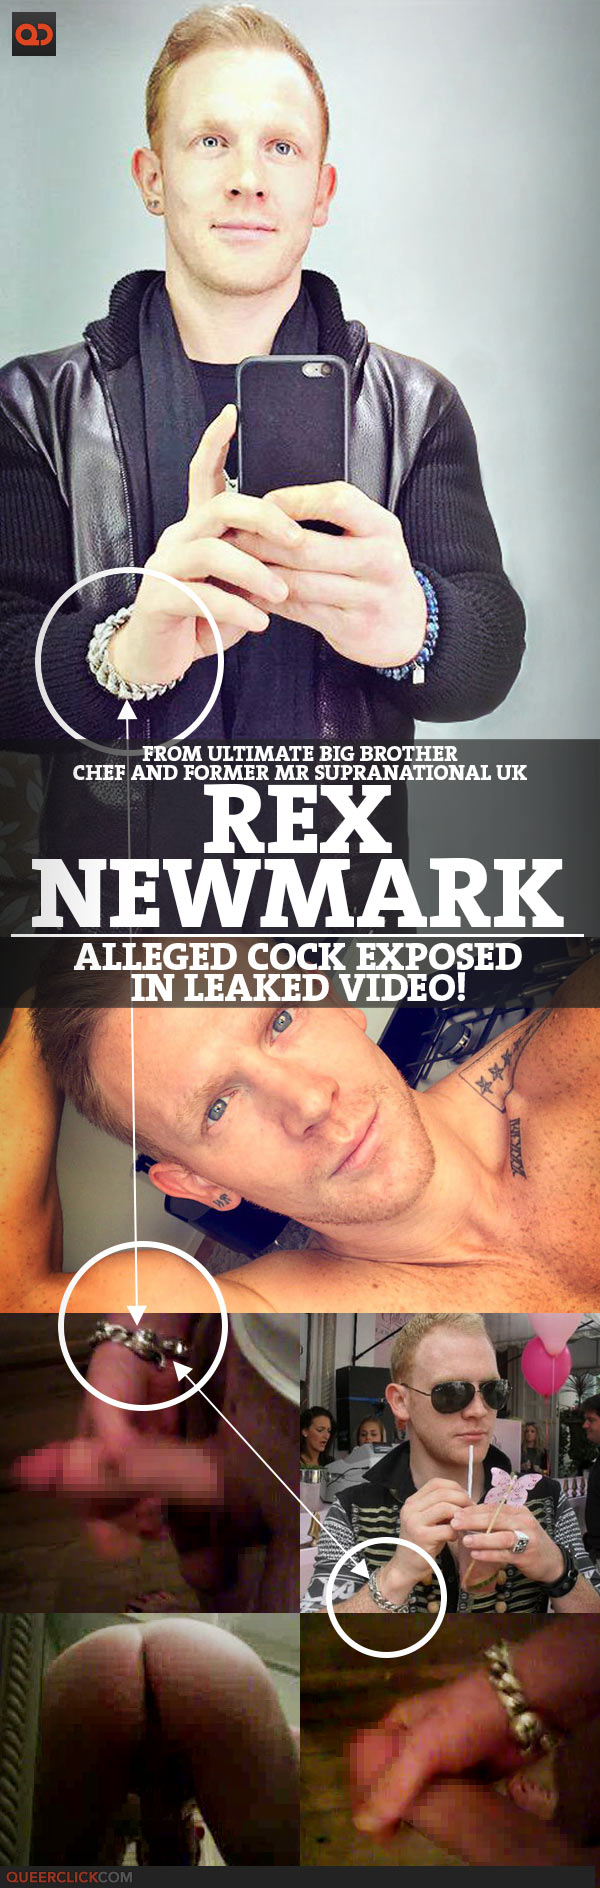 Rex Newmark, From Ultimate Big Brother - Chef And Former Mr Supranational UK, Alleged Cock Exposed In Leaked Video!